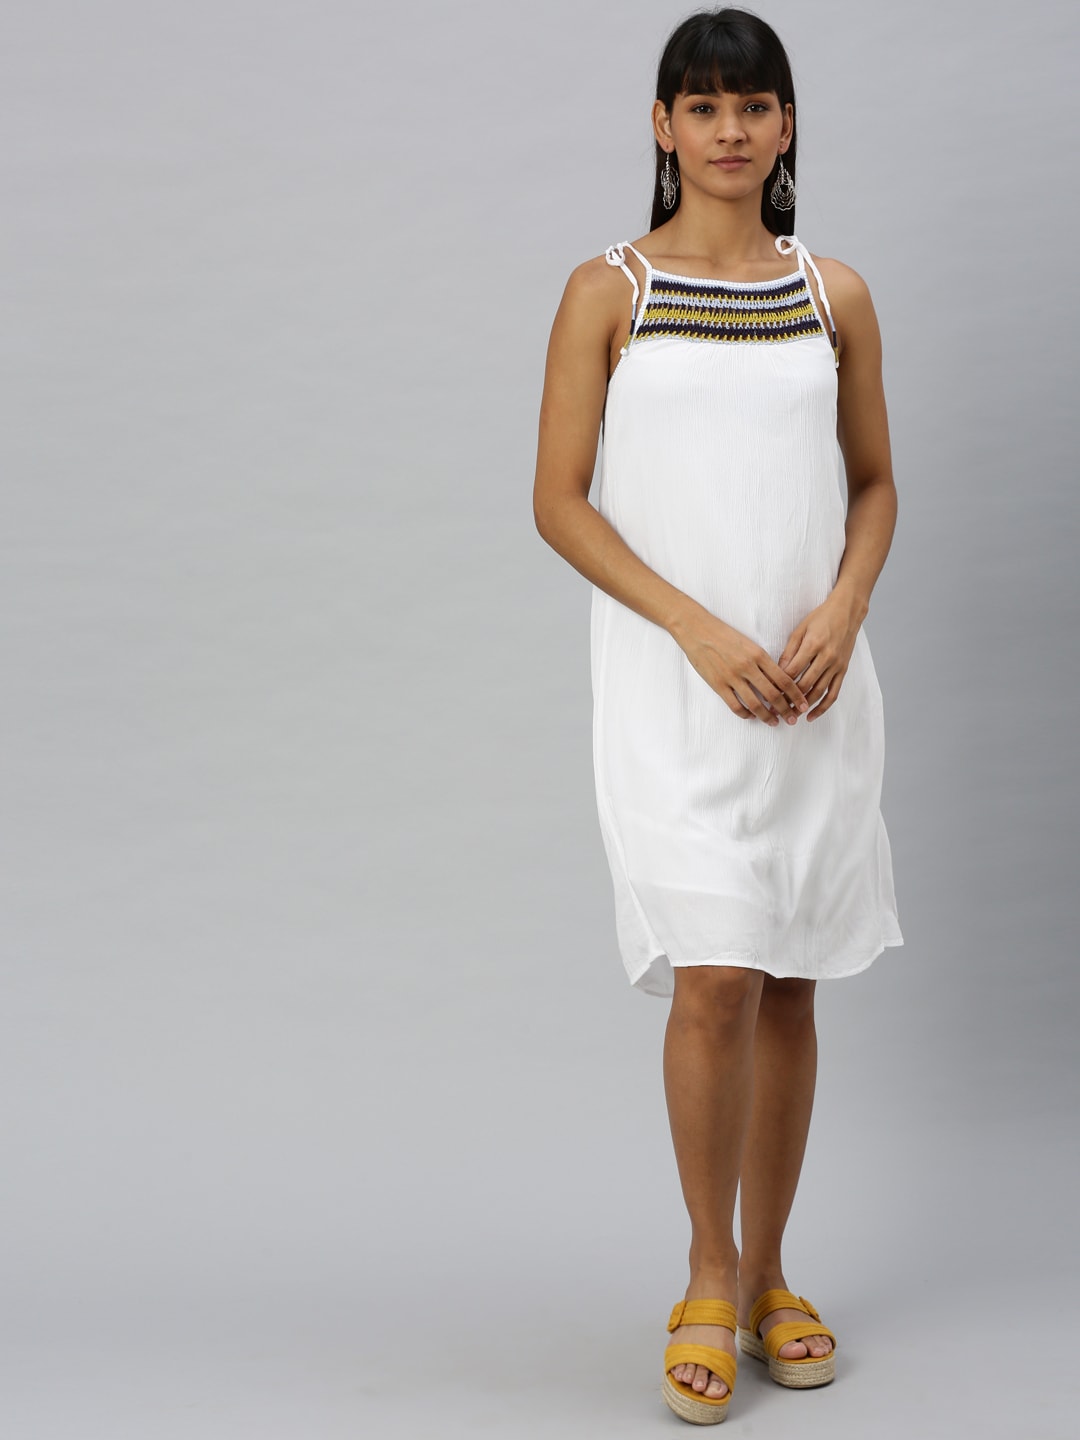 Vero Moda Women White Solid Knit Detailed A-Line Dress Price in India